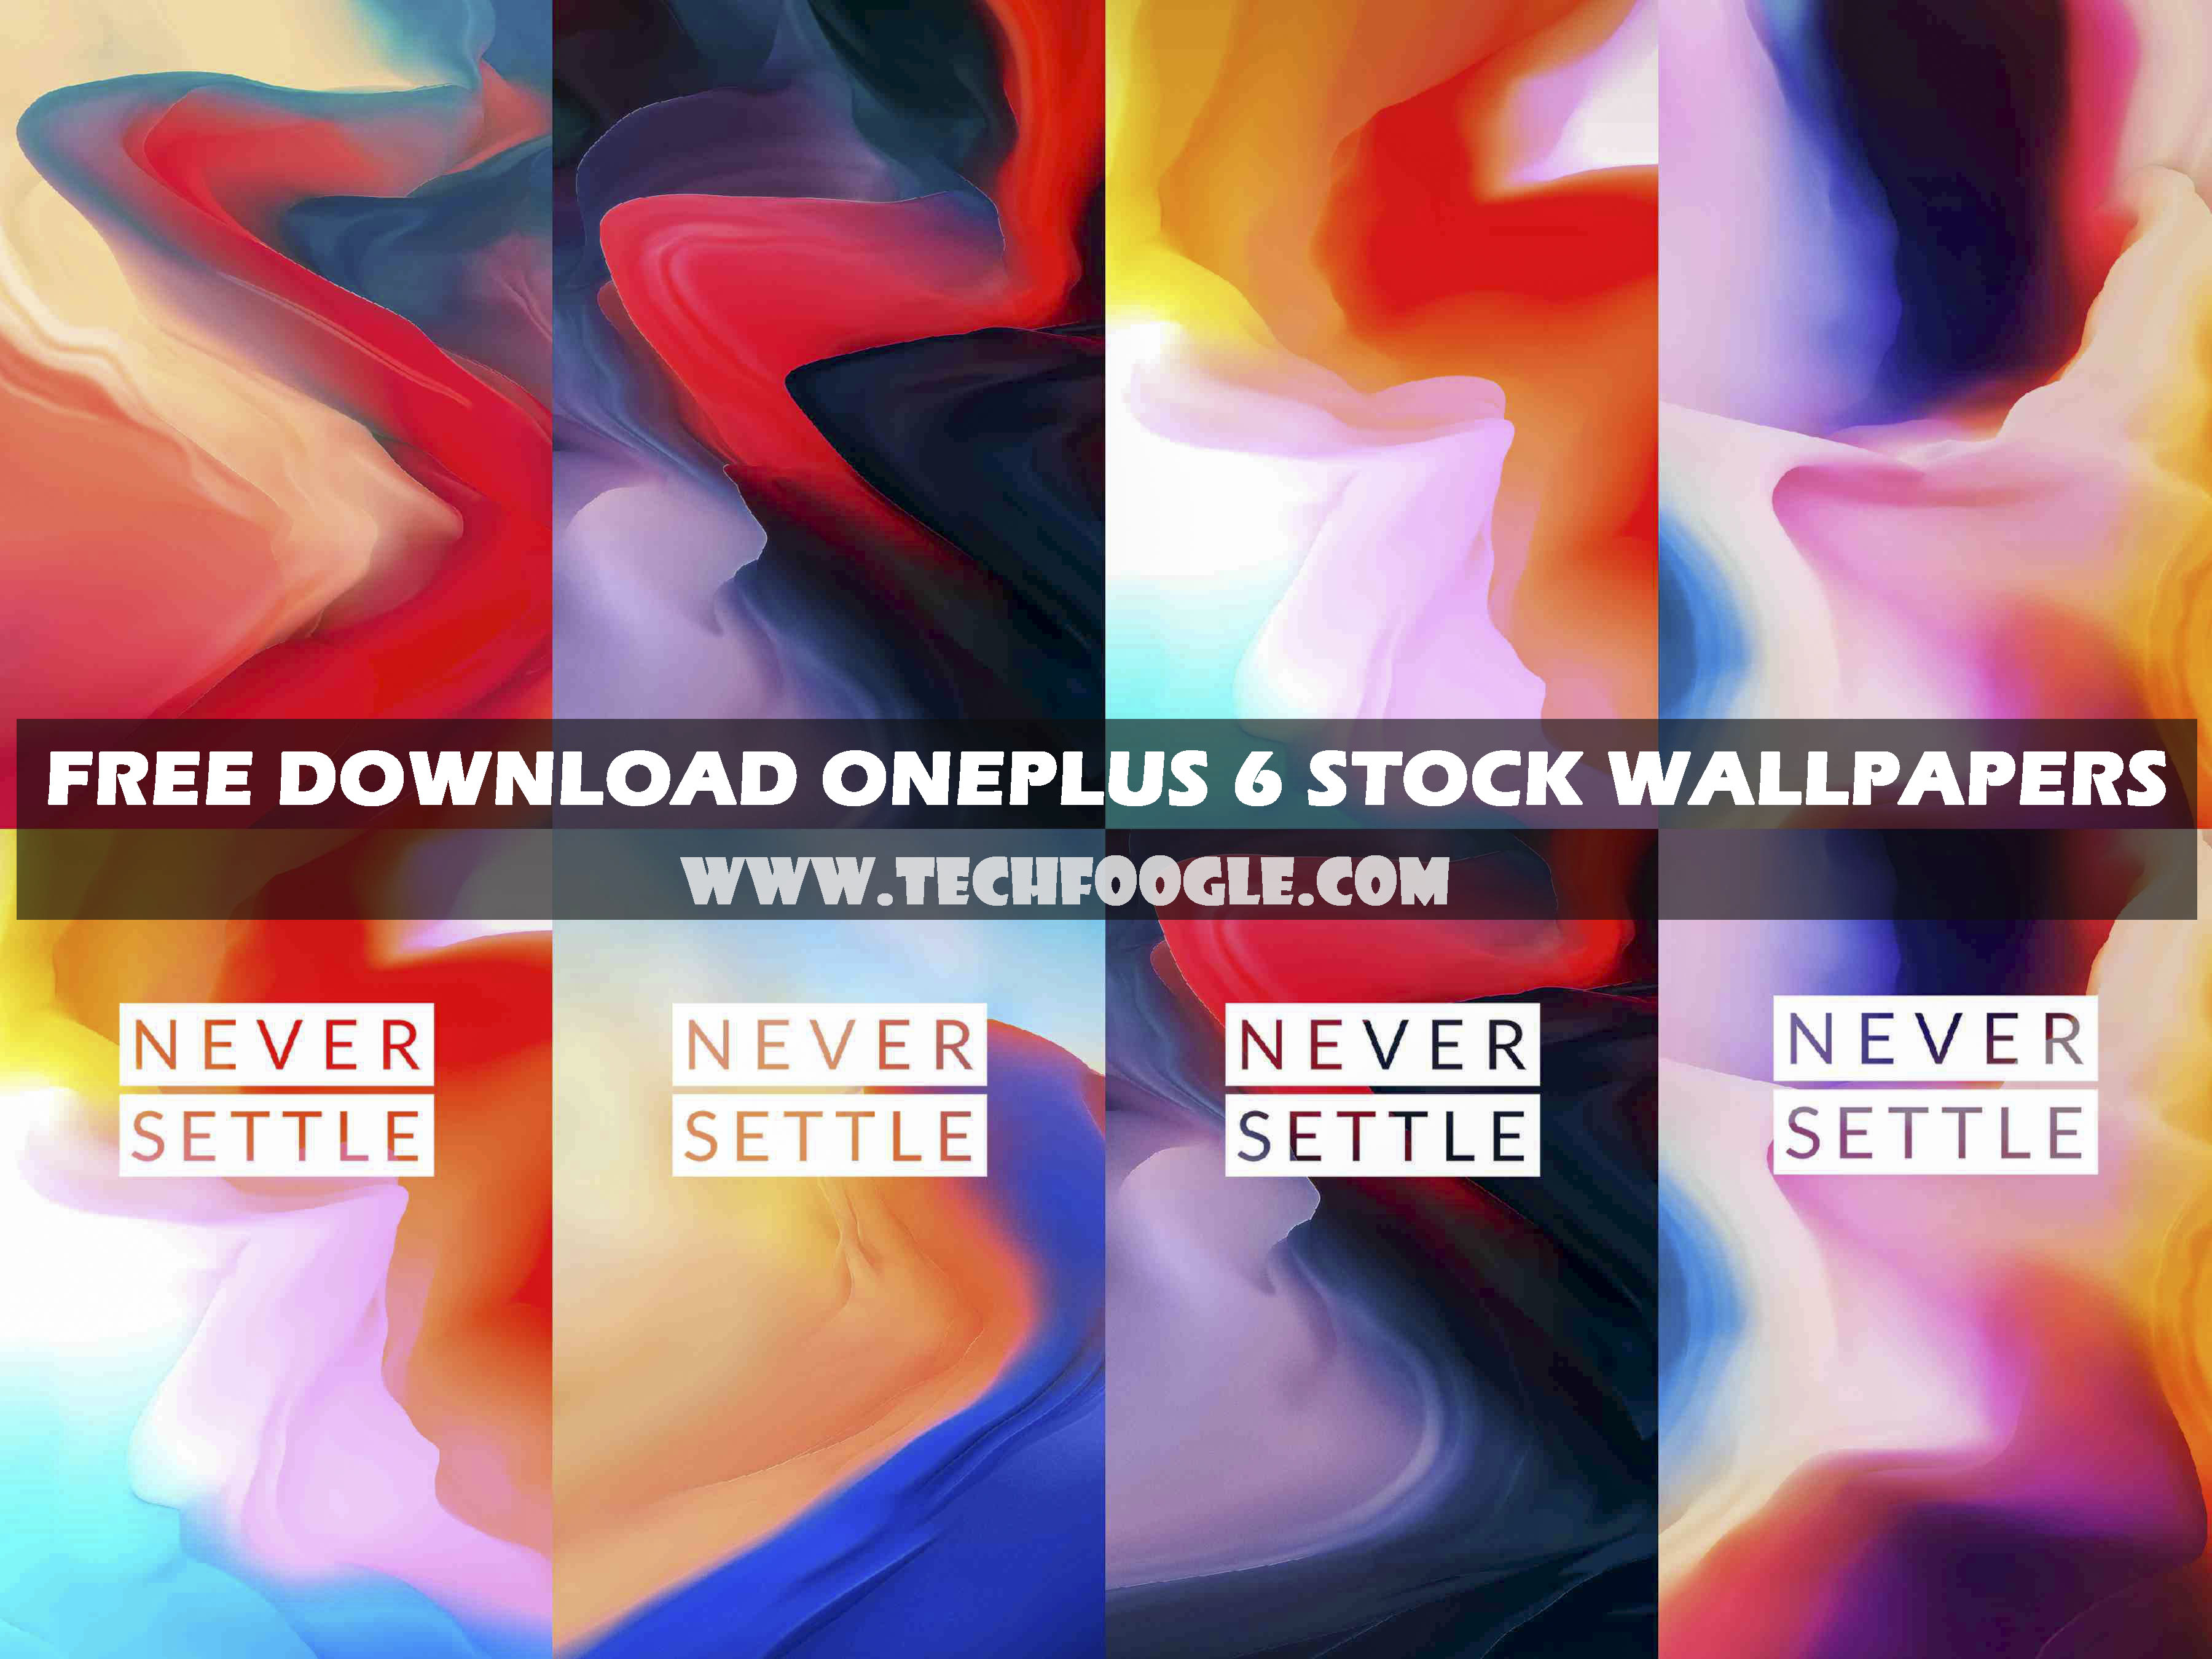 Oneplus 6 stock wallpapers collage 1